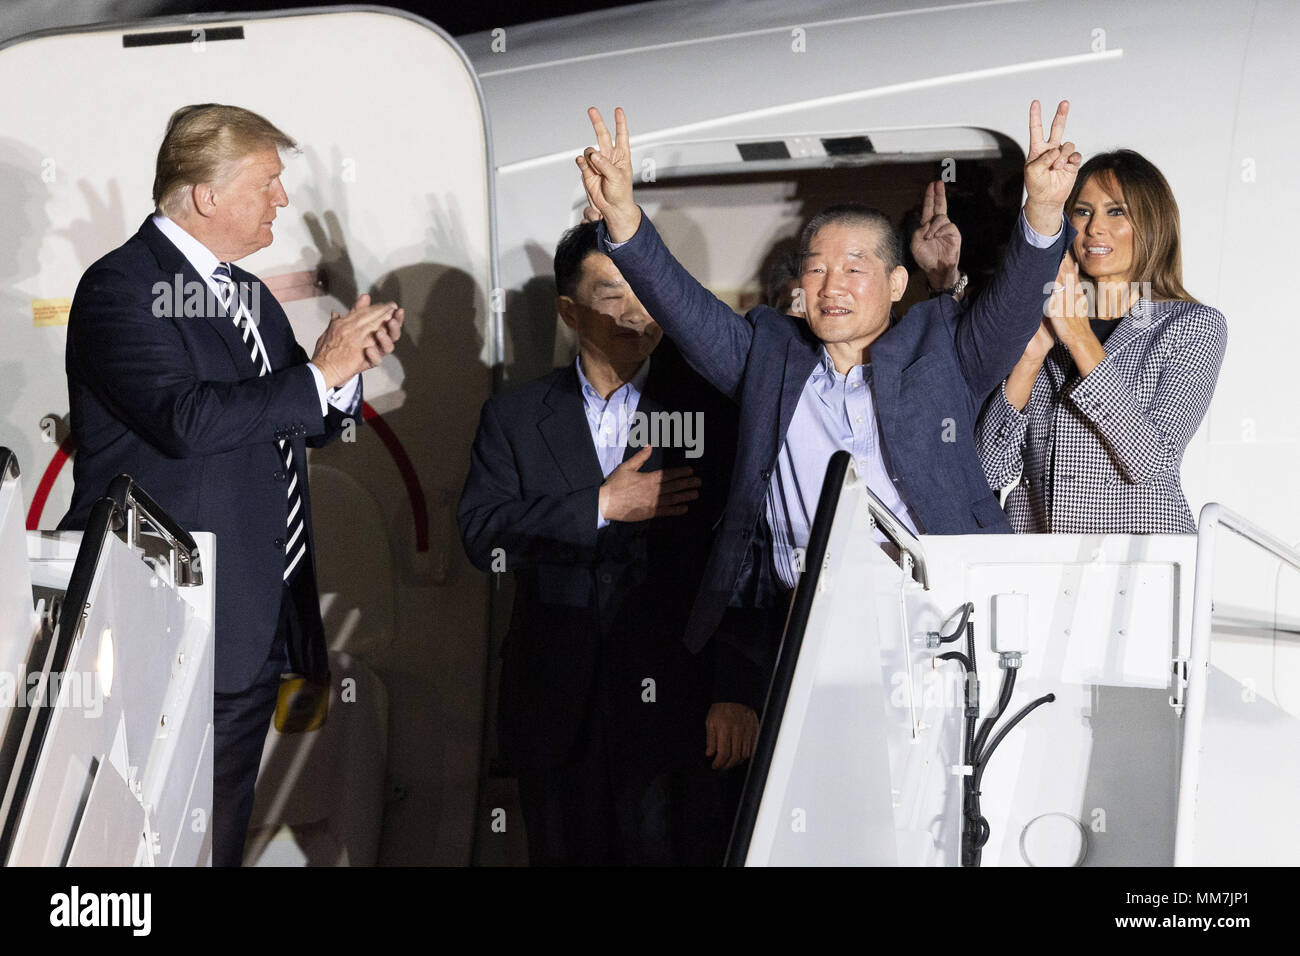 Suitland, MD, USA. 10th May, 2018. President DONALD TRUMP and his wife MELANIA TRUMP welcoming the three American detainees (KIM DONG-CHUL, KIM HAK-SONG, and TONY KIM) held in captivity in North Korea at Joint Base Andrews in Suitland, Maryland on May 10, 2018. Credit: Michael Brochstein/ZUMA Wire/Alamy Live News Stock Photo